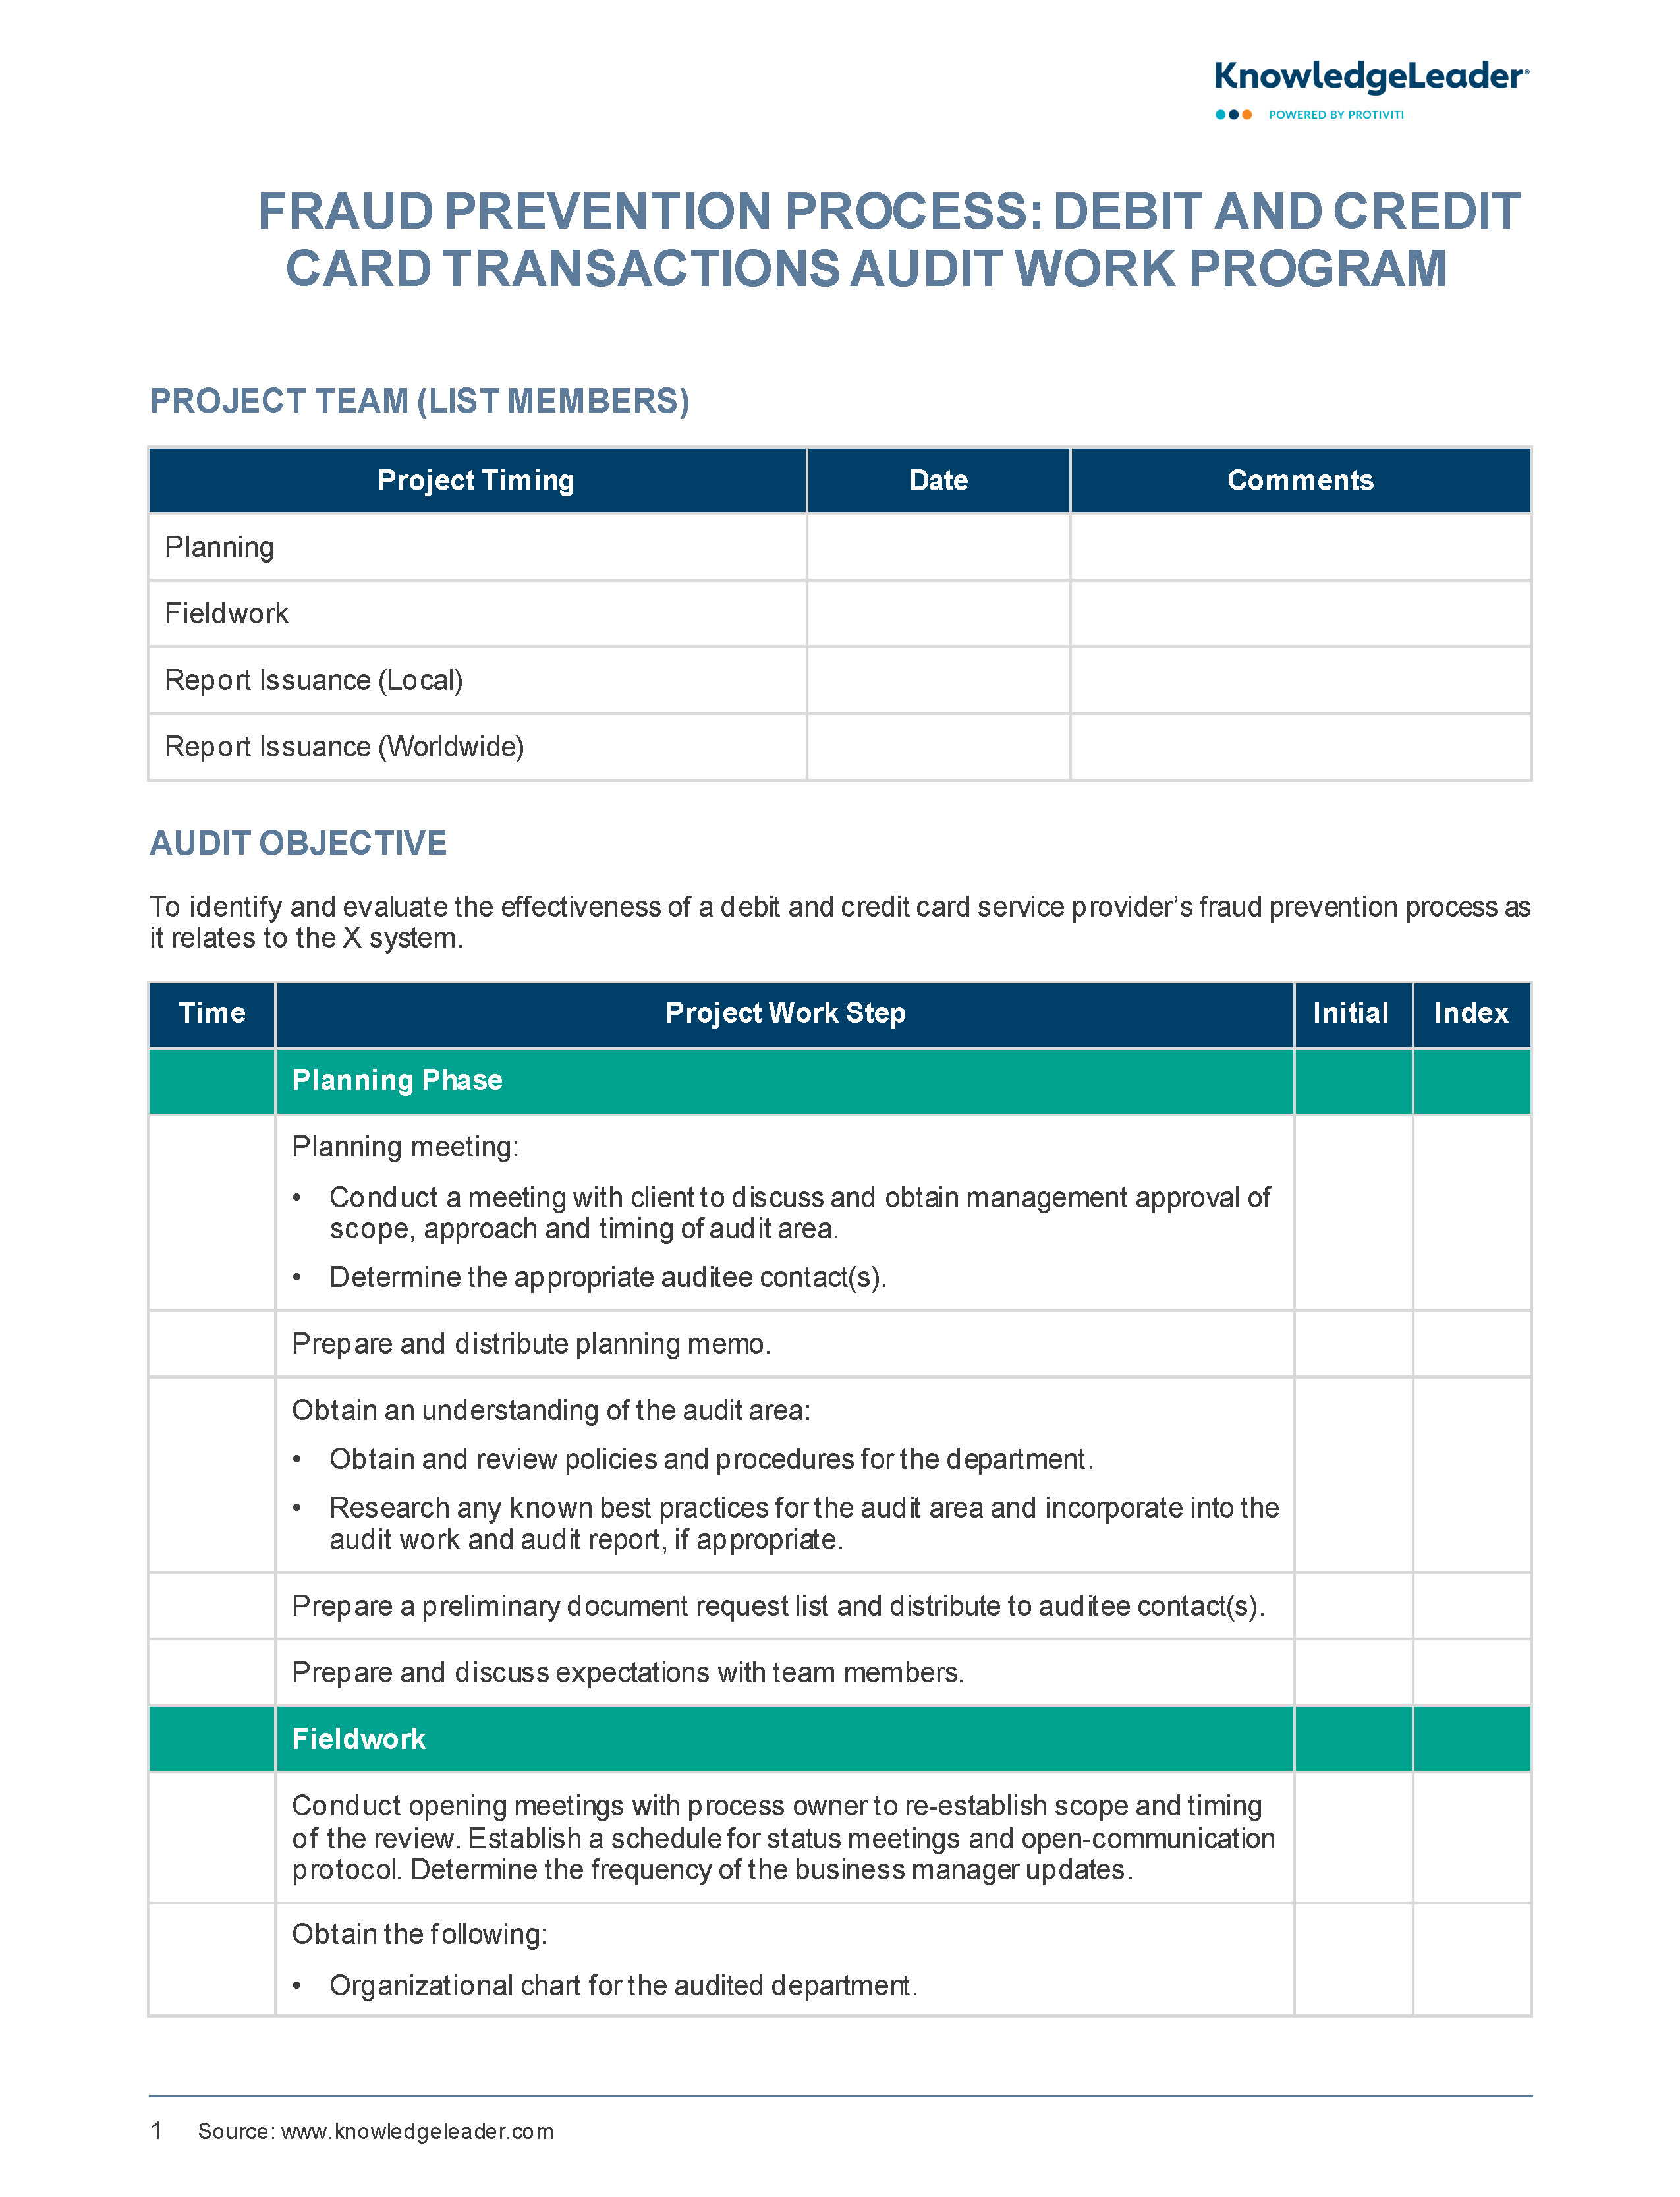 Screenshot of the first page of Fraud Prevention Process – Debit and Credit Card Transactions – Audit Work Program